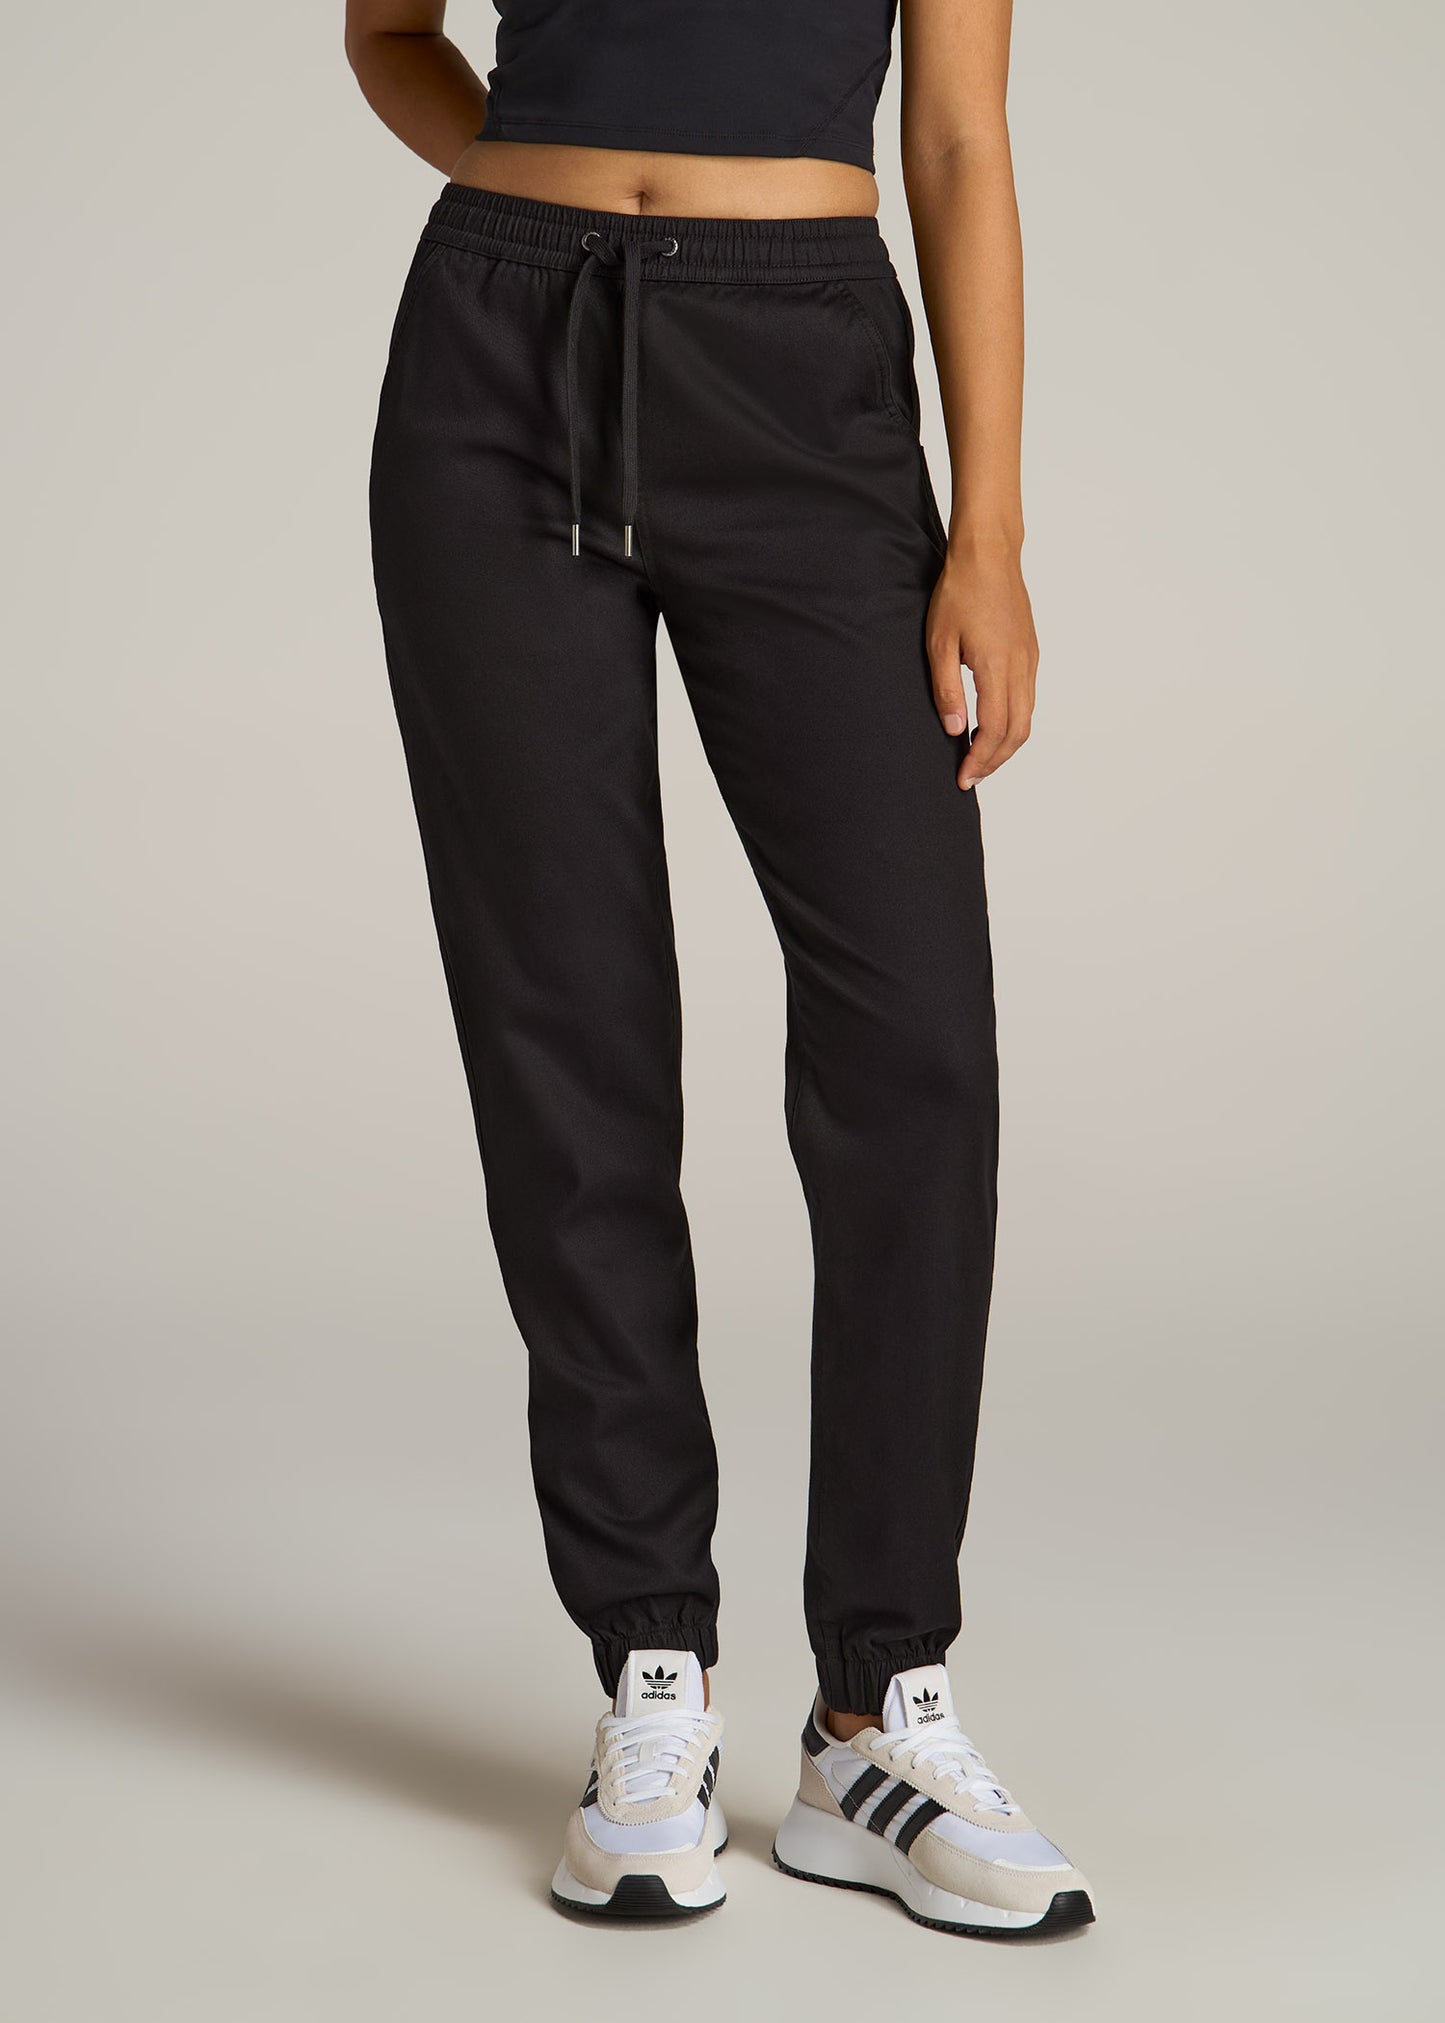 Twill Jogger Pants for Tall Women in Black